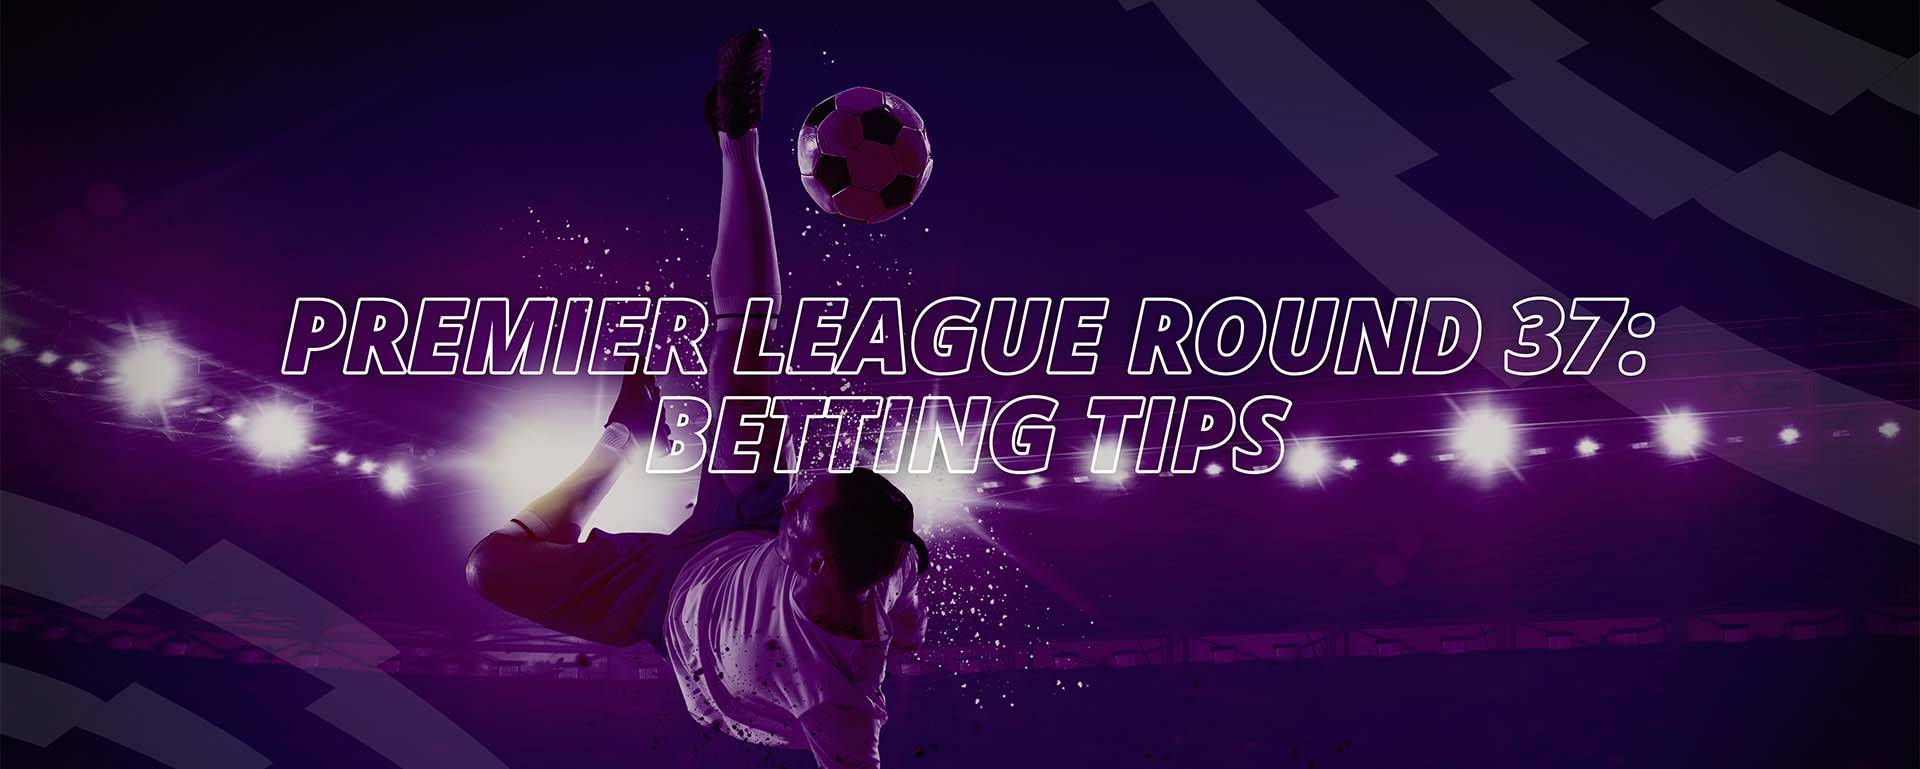 PREMIER LEAGUE ROUND 37: BETTING TIPS